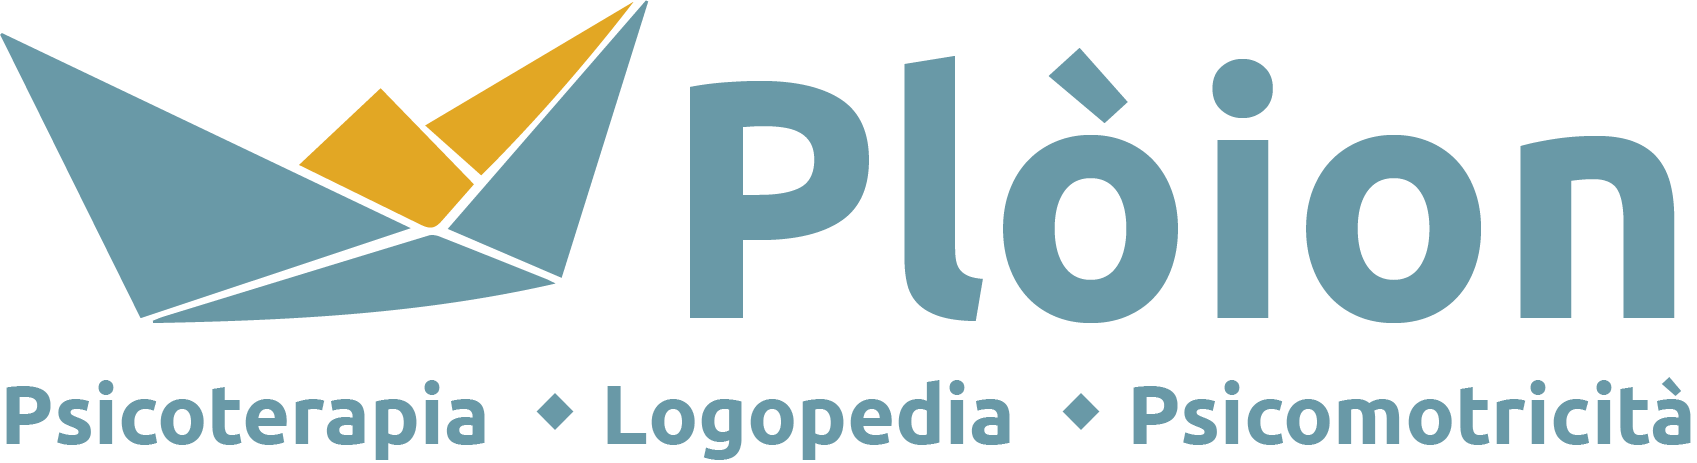 https://www.centroploion.com/wp-content/uploads/2019/05/cropped-ploion-logo.png